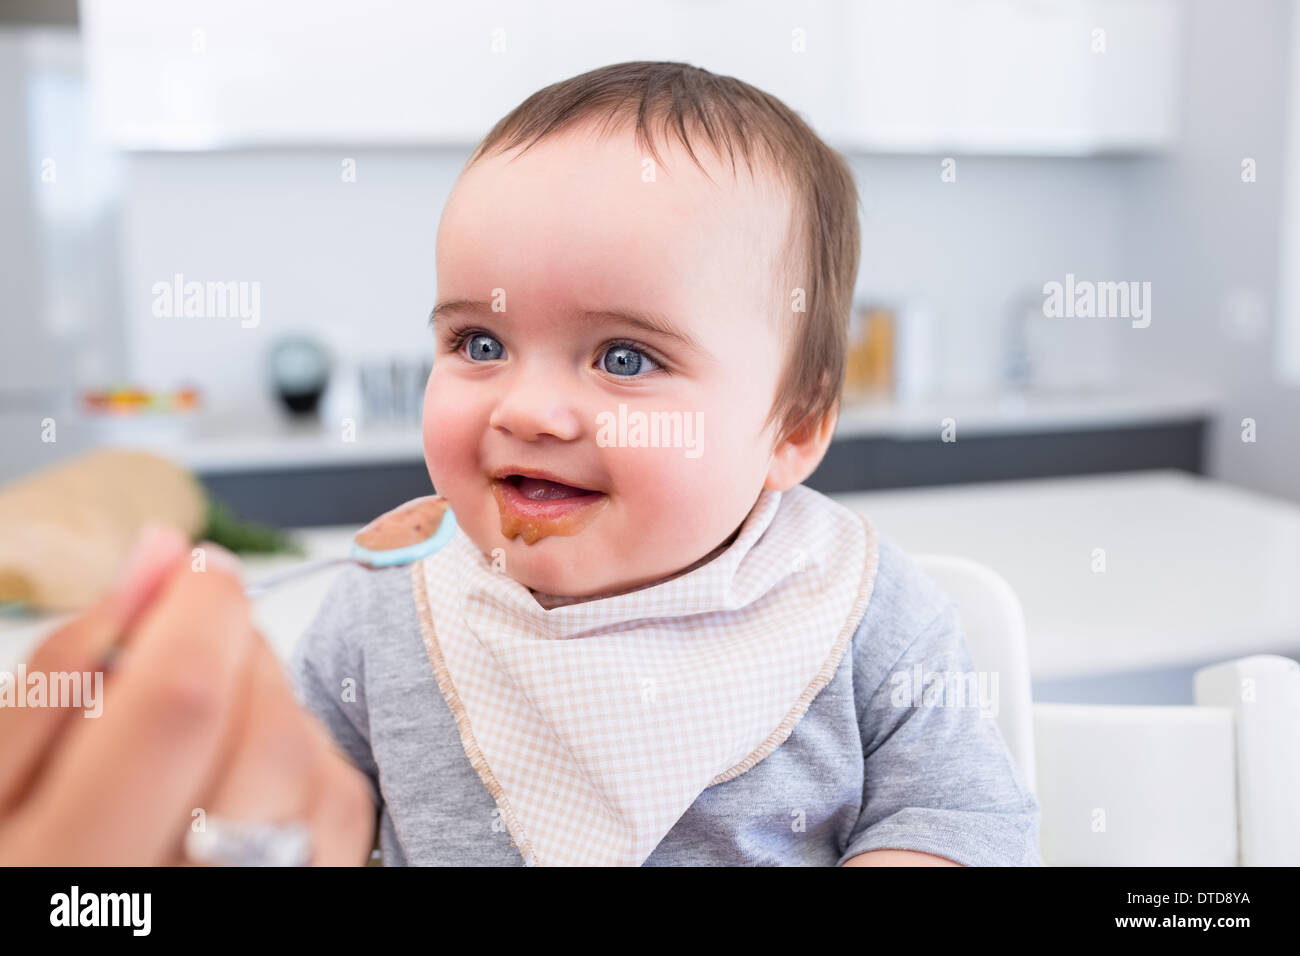 Happy baby being fed by mother Stock Photo